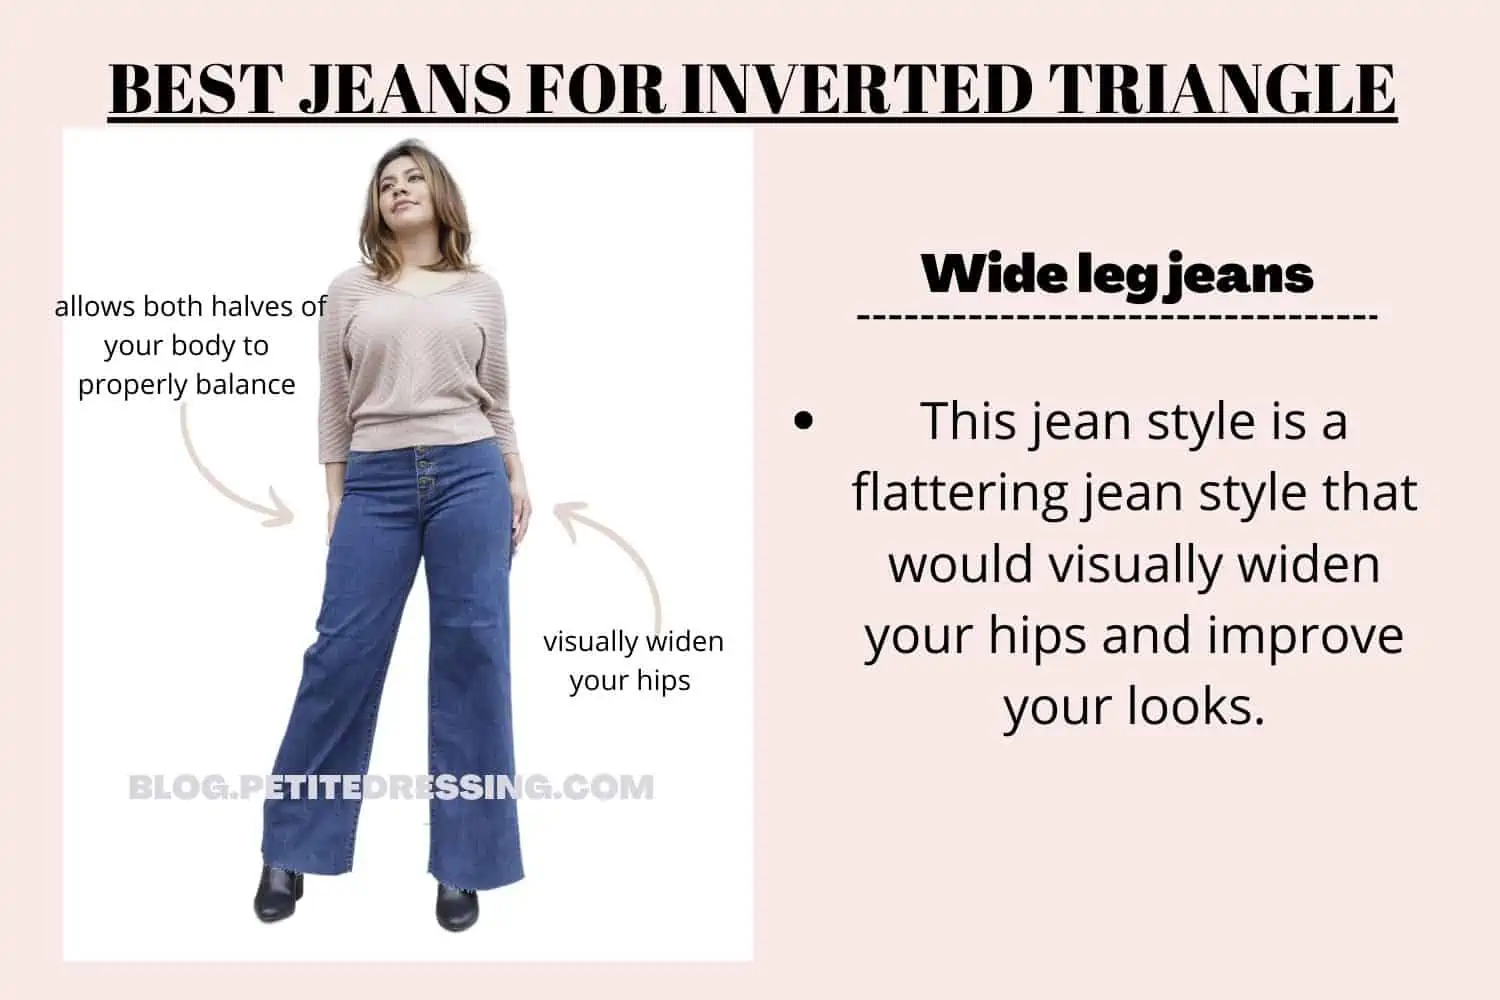 The Complete Jeans Guide for Inverted Triangle Body Shape